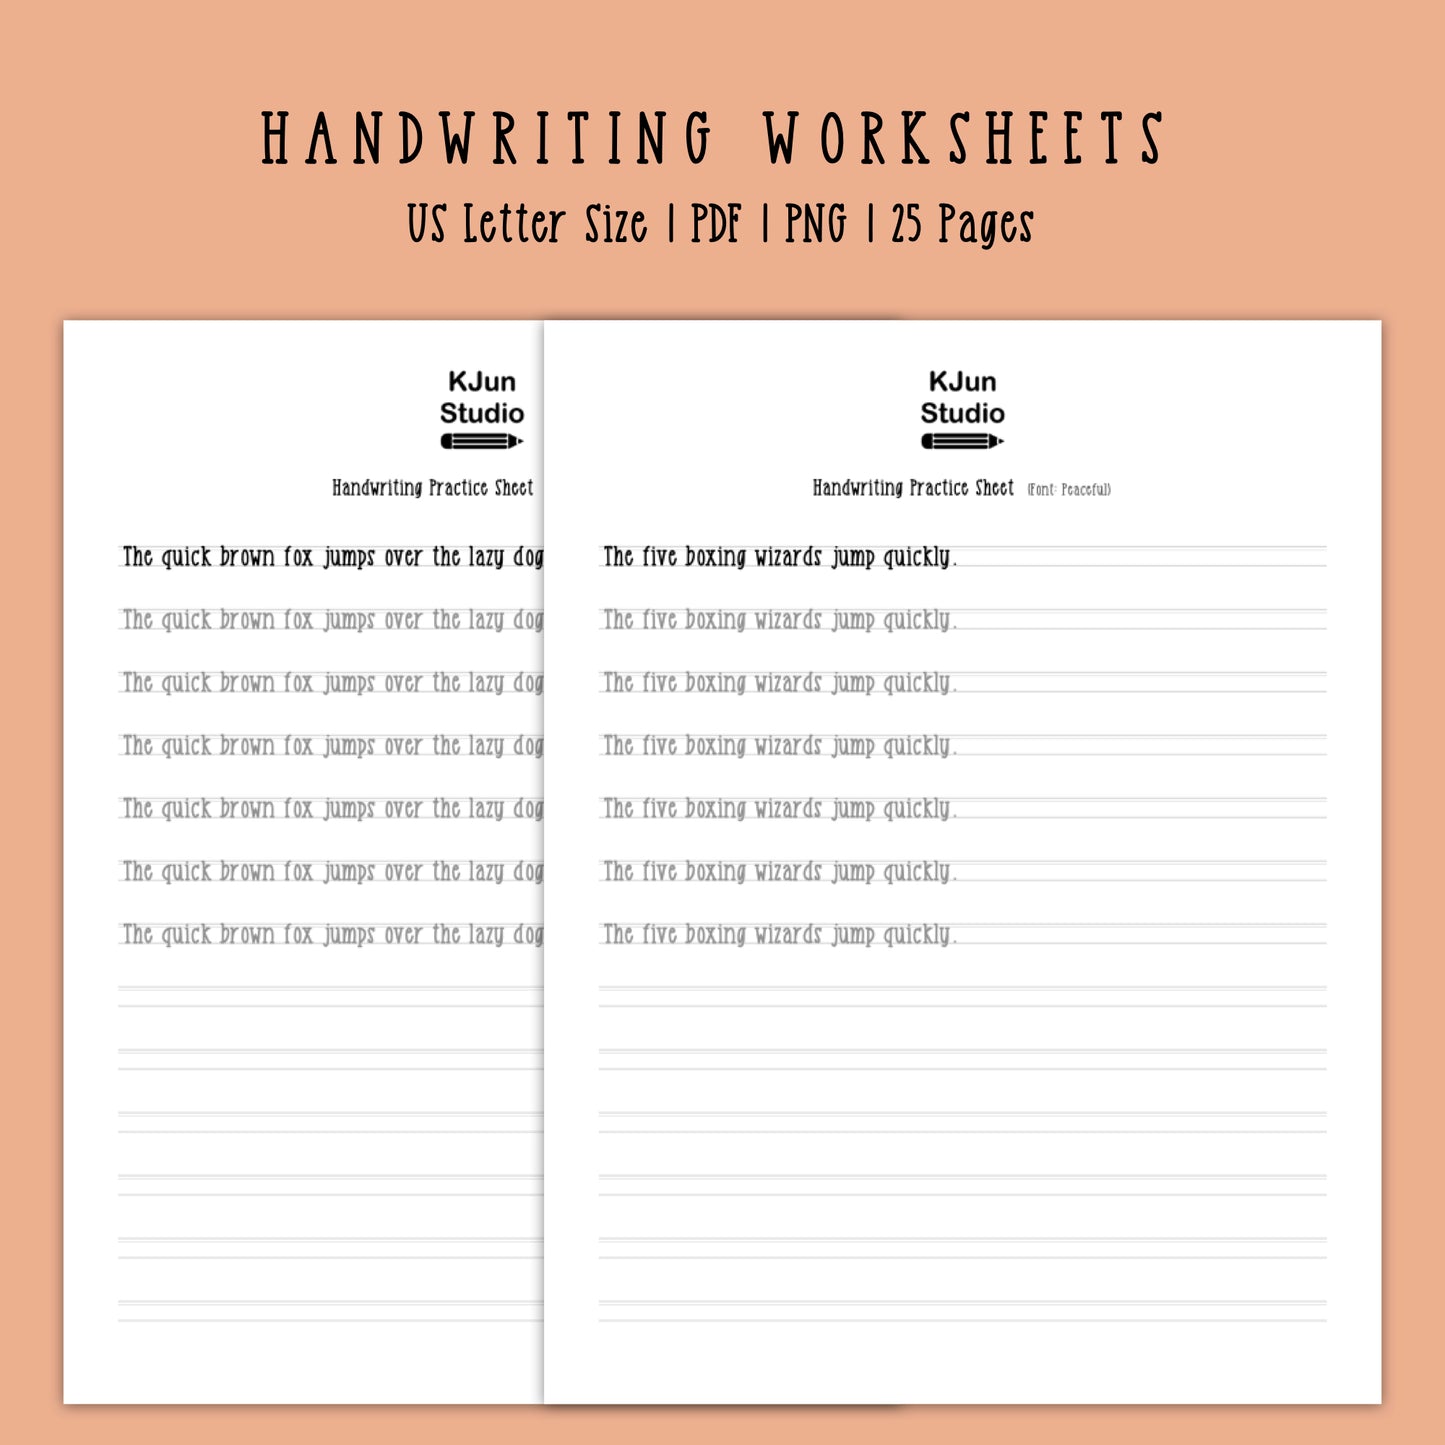 Handwriting Practice Sheets - Peaceful Font